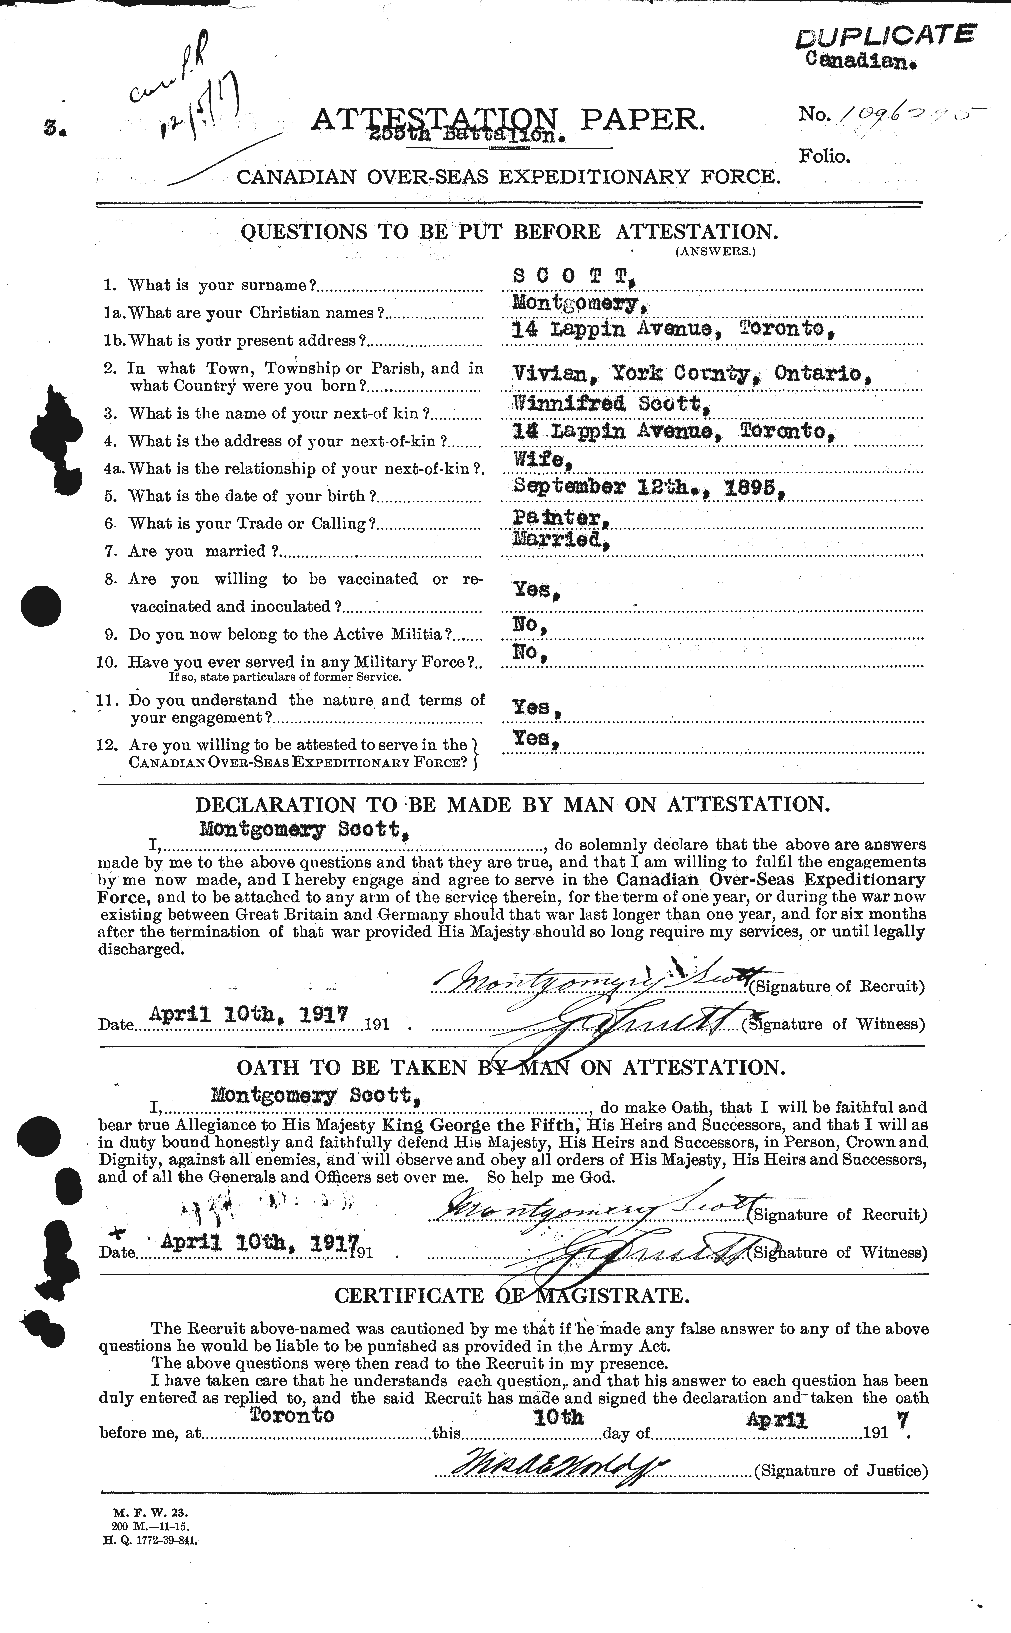 Personnel Records of the First World War - CEF 083489a